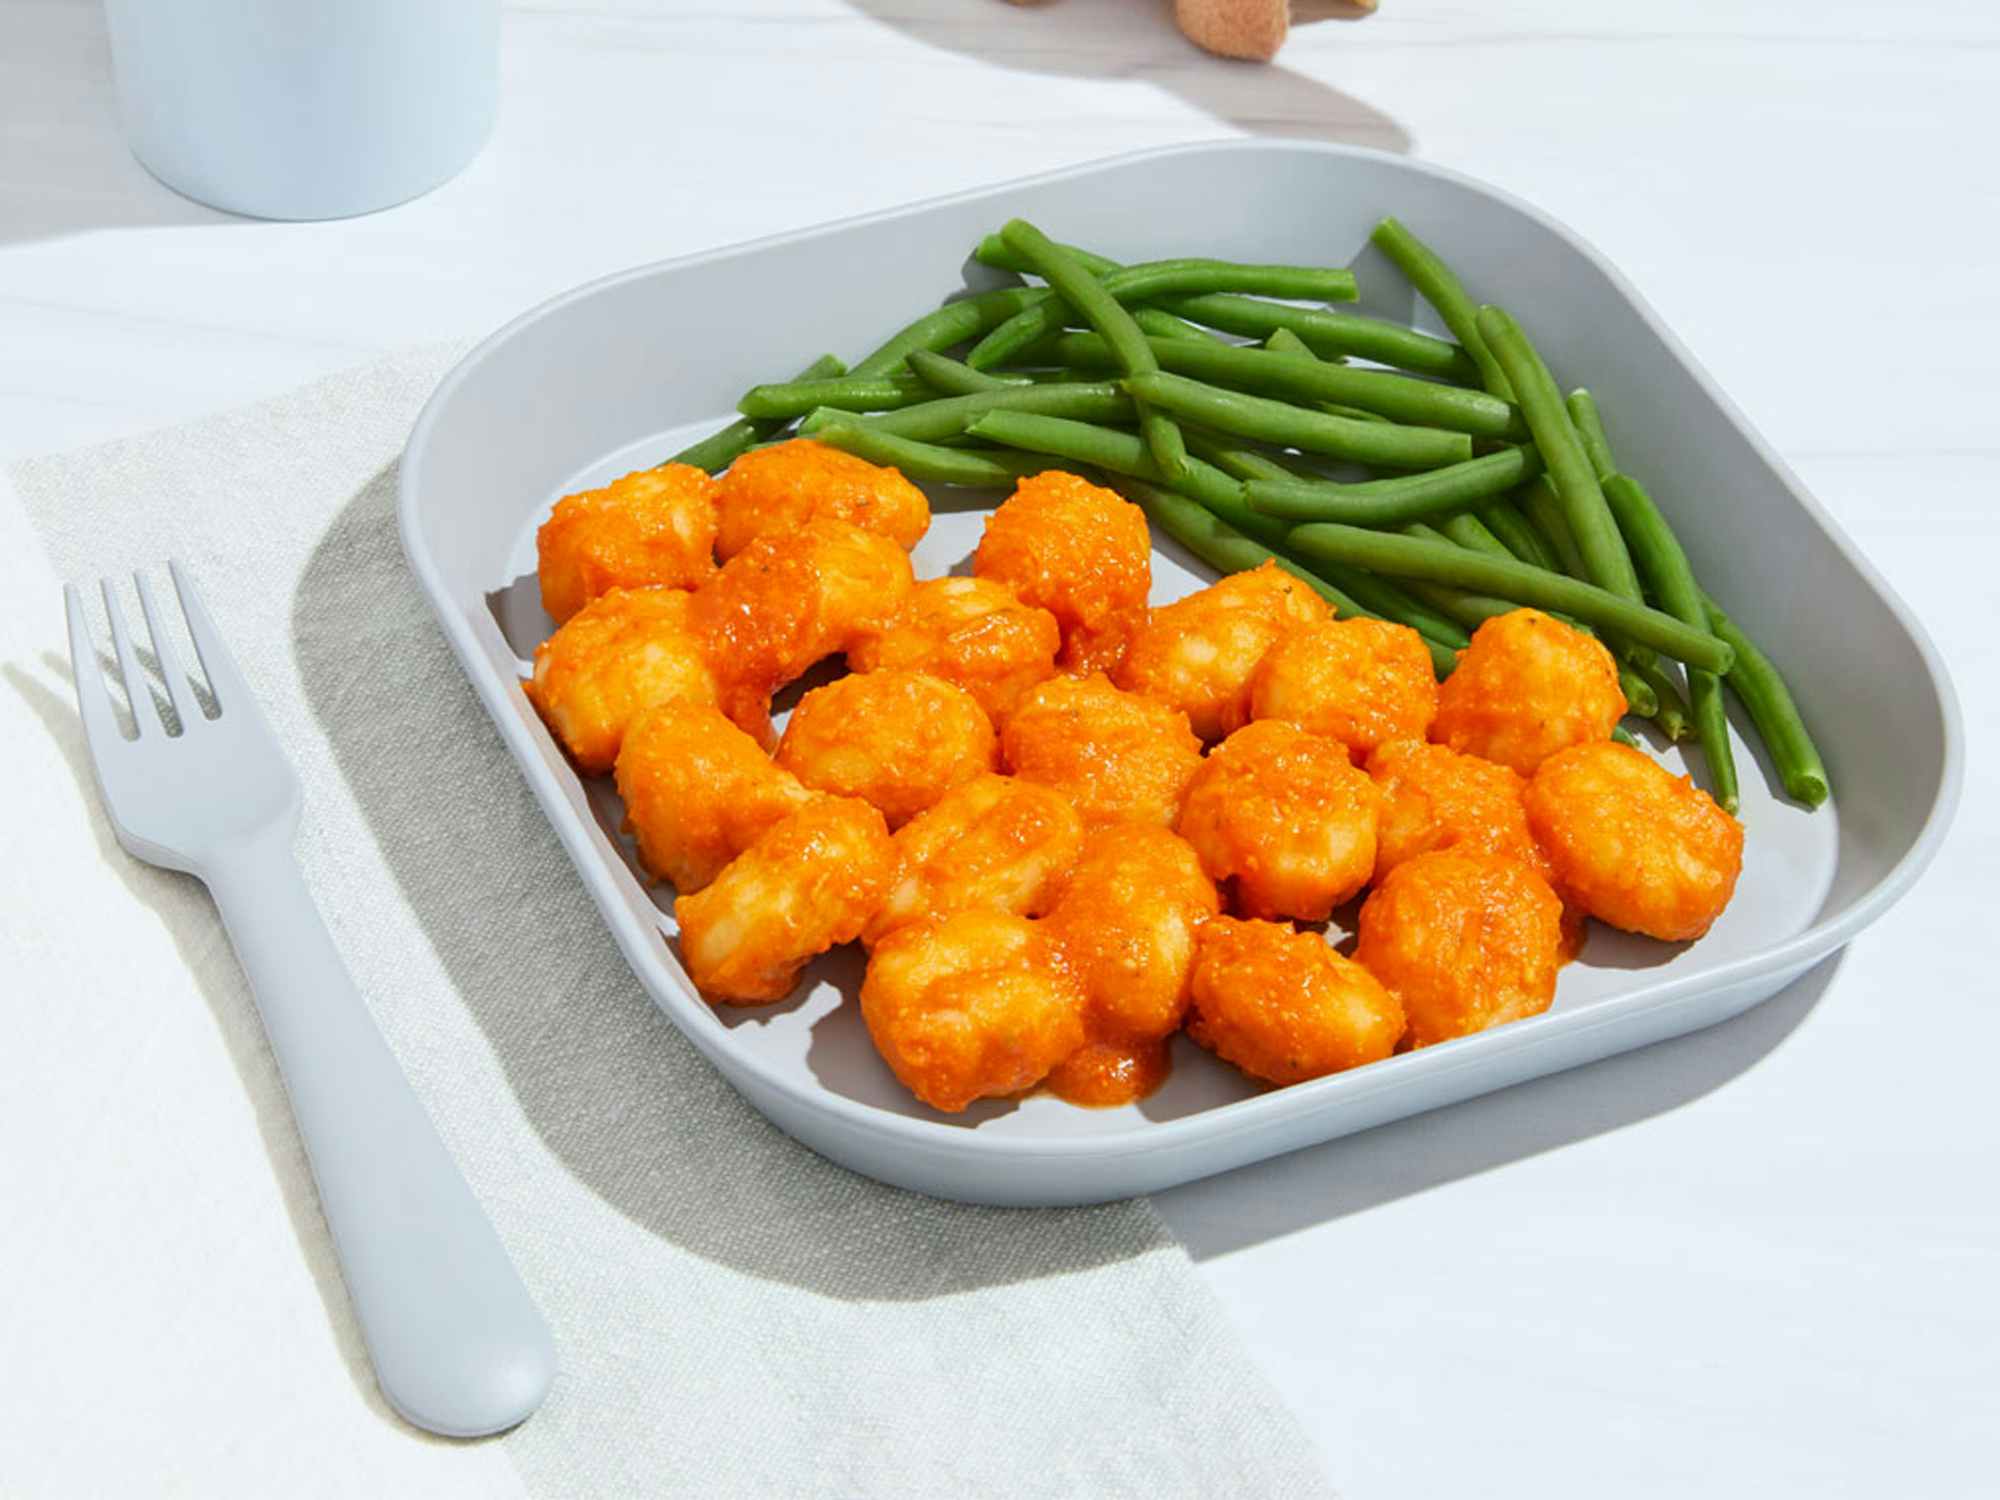 gnocchi from nurture life on a plate next to green beans